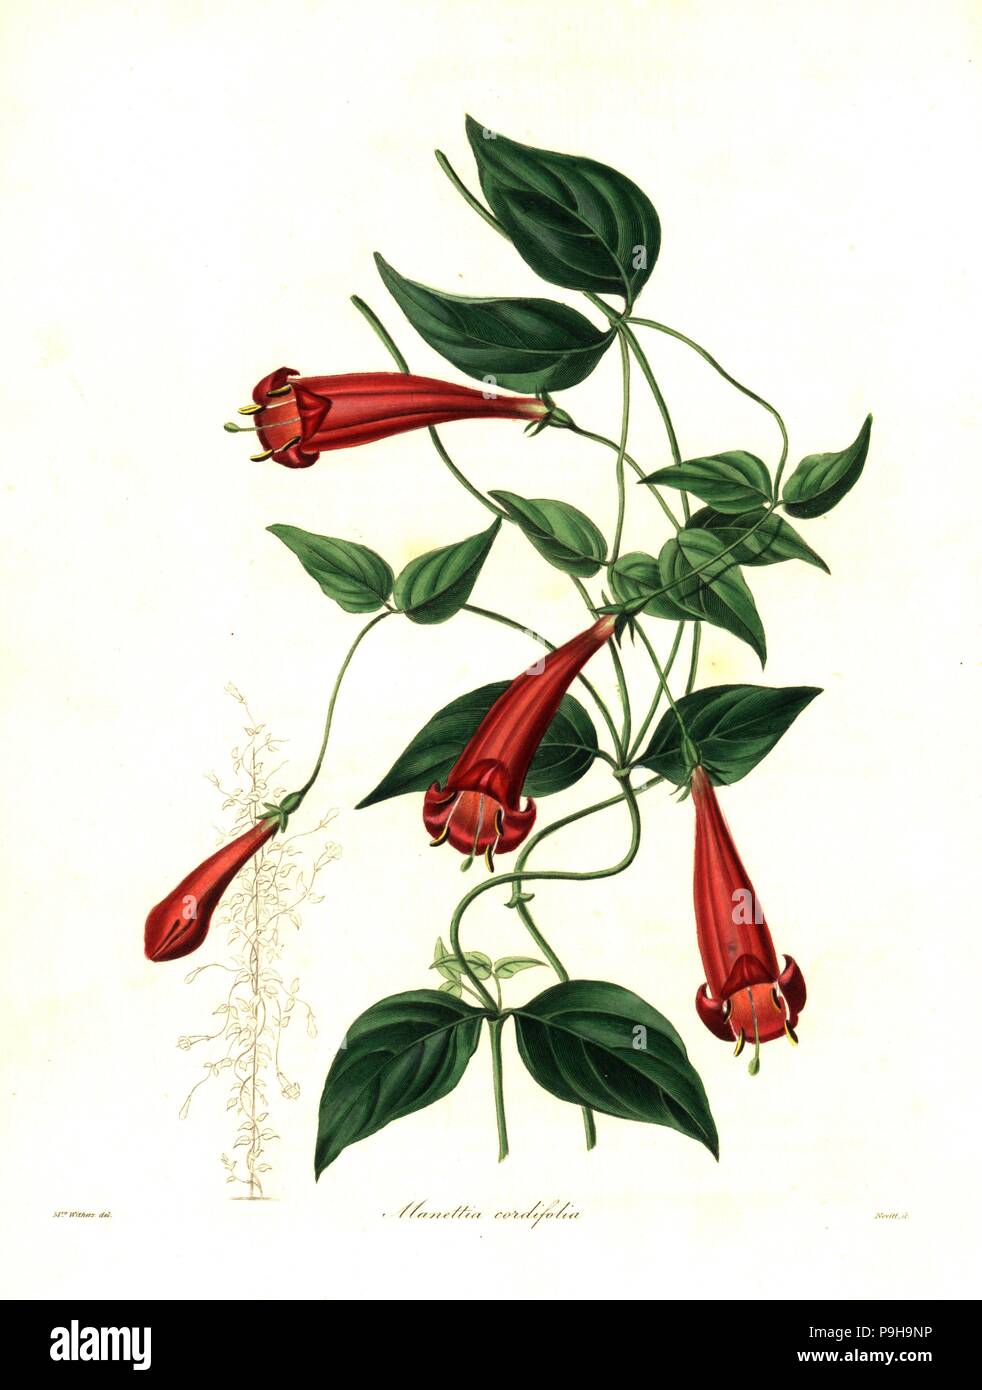 Heart-leaved manettia, Manettia cordifolia. Handcoloured copperplate engraving by S. Nevitt after a botanical illustration by Mrs Augusta Withers from Benjamin Maund and the Rev. John Stevens Henslow's The Botanist, London, 1836. Stock Photo